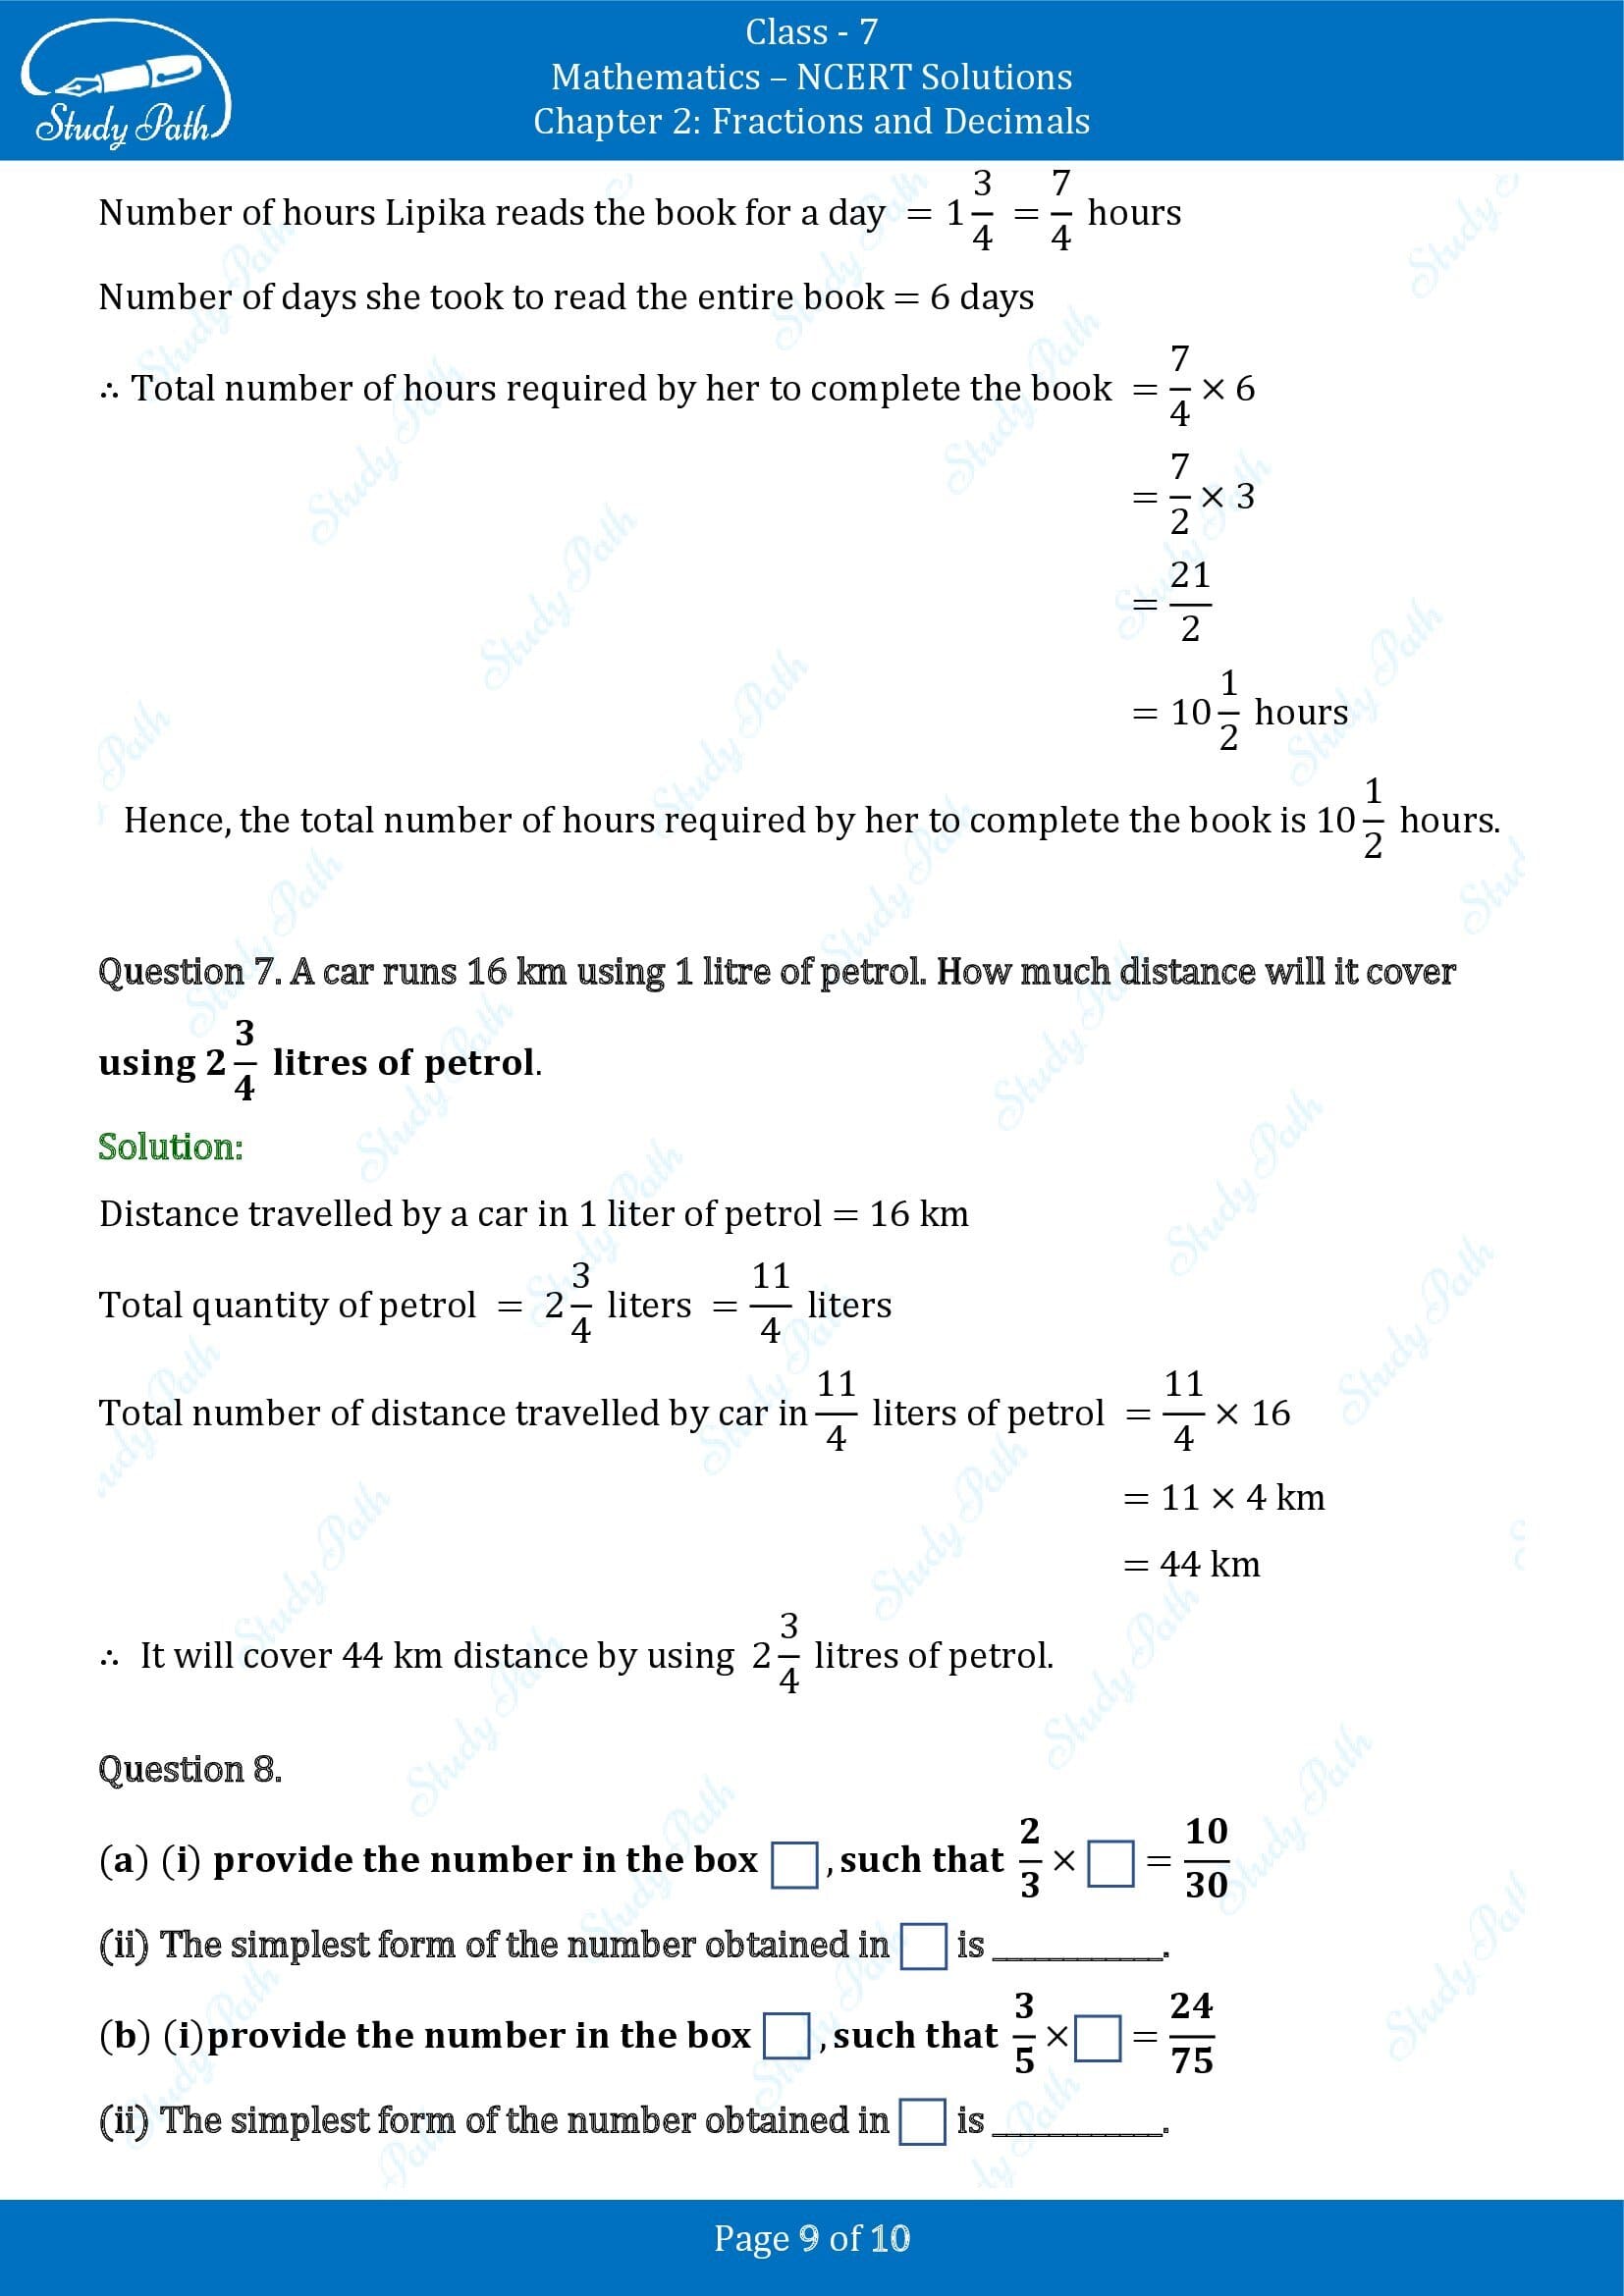 NCERT Solutions for Class 7 Maths Chapter 2 Fractions and Decimals Exercise 2.3 00009